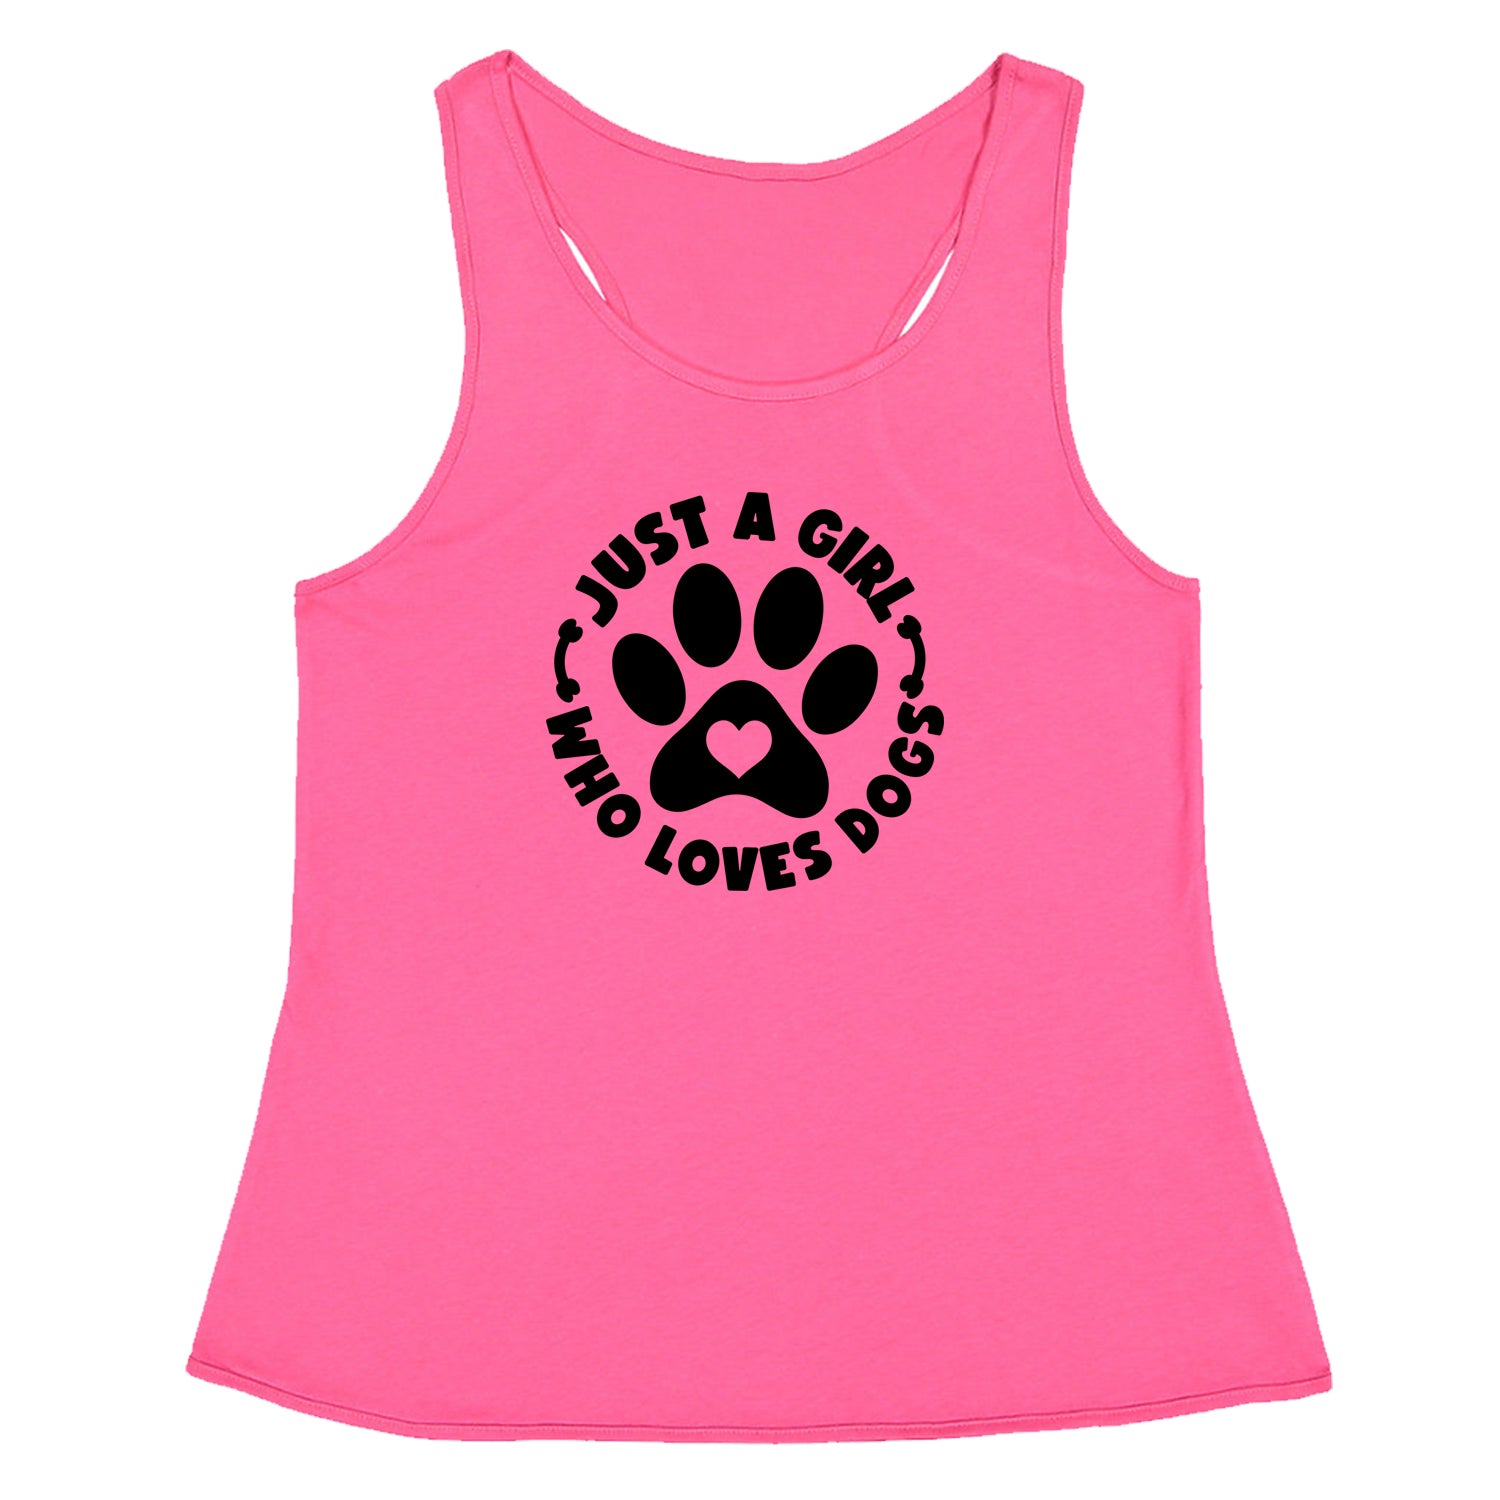 Dogs Just A Girl Who Loves DOGS Racerback Tank Top for Women dog, puppy, rescue by Expression Tees